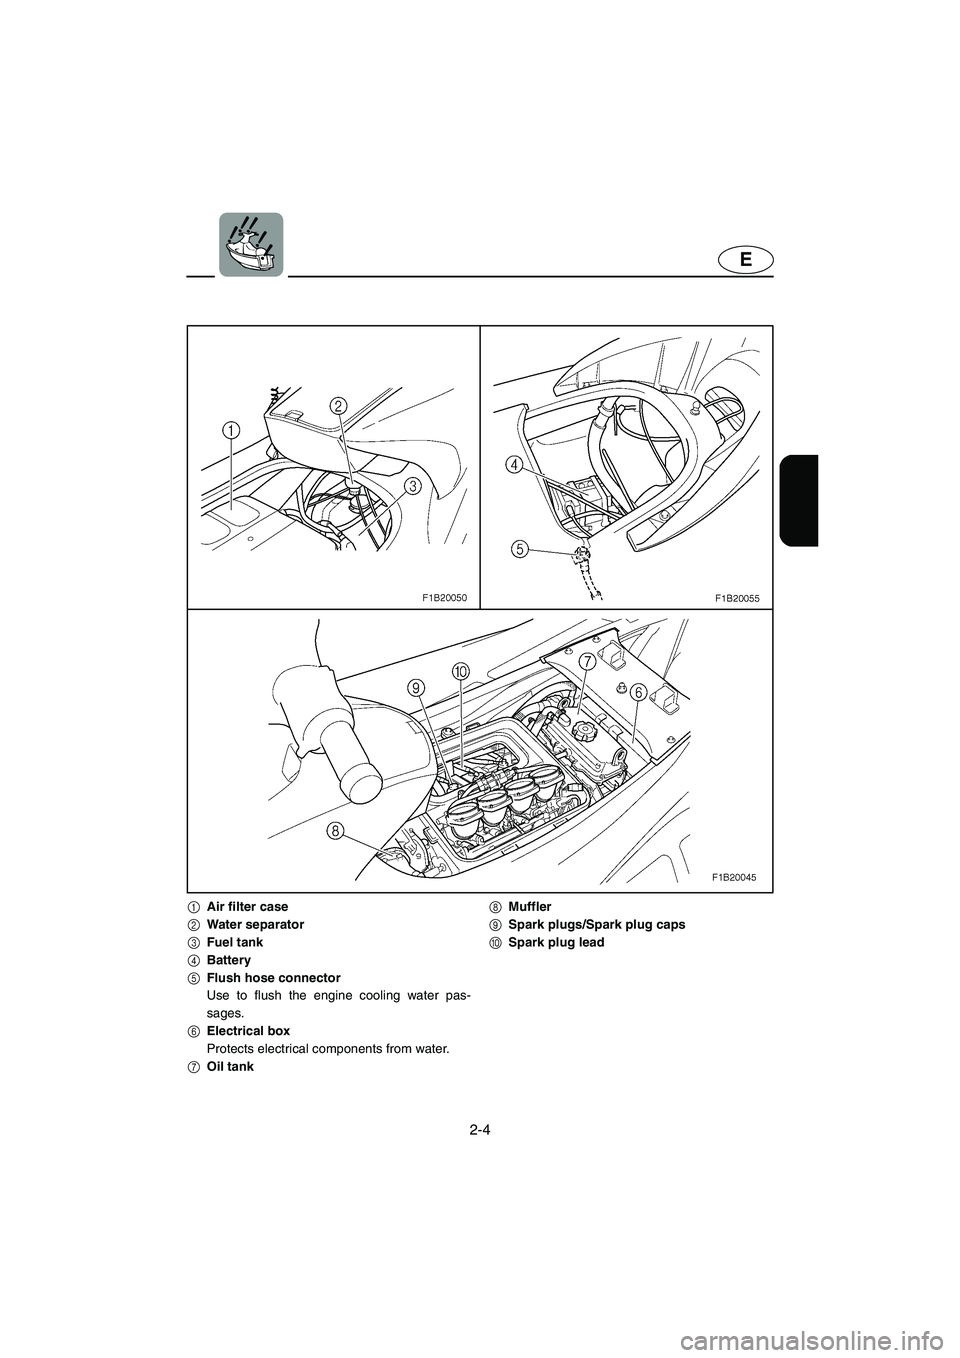 YAMAHA FX 2003  Owners Manual 2-4
E
1Air filter case
2Water separator
3Fuel tank
4Battery
5Flush hose connector
Use to flush the engine cooling water pas-
sages.
6Electrical box
Protects electrical components from water.
7Oil tank